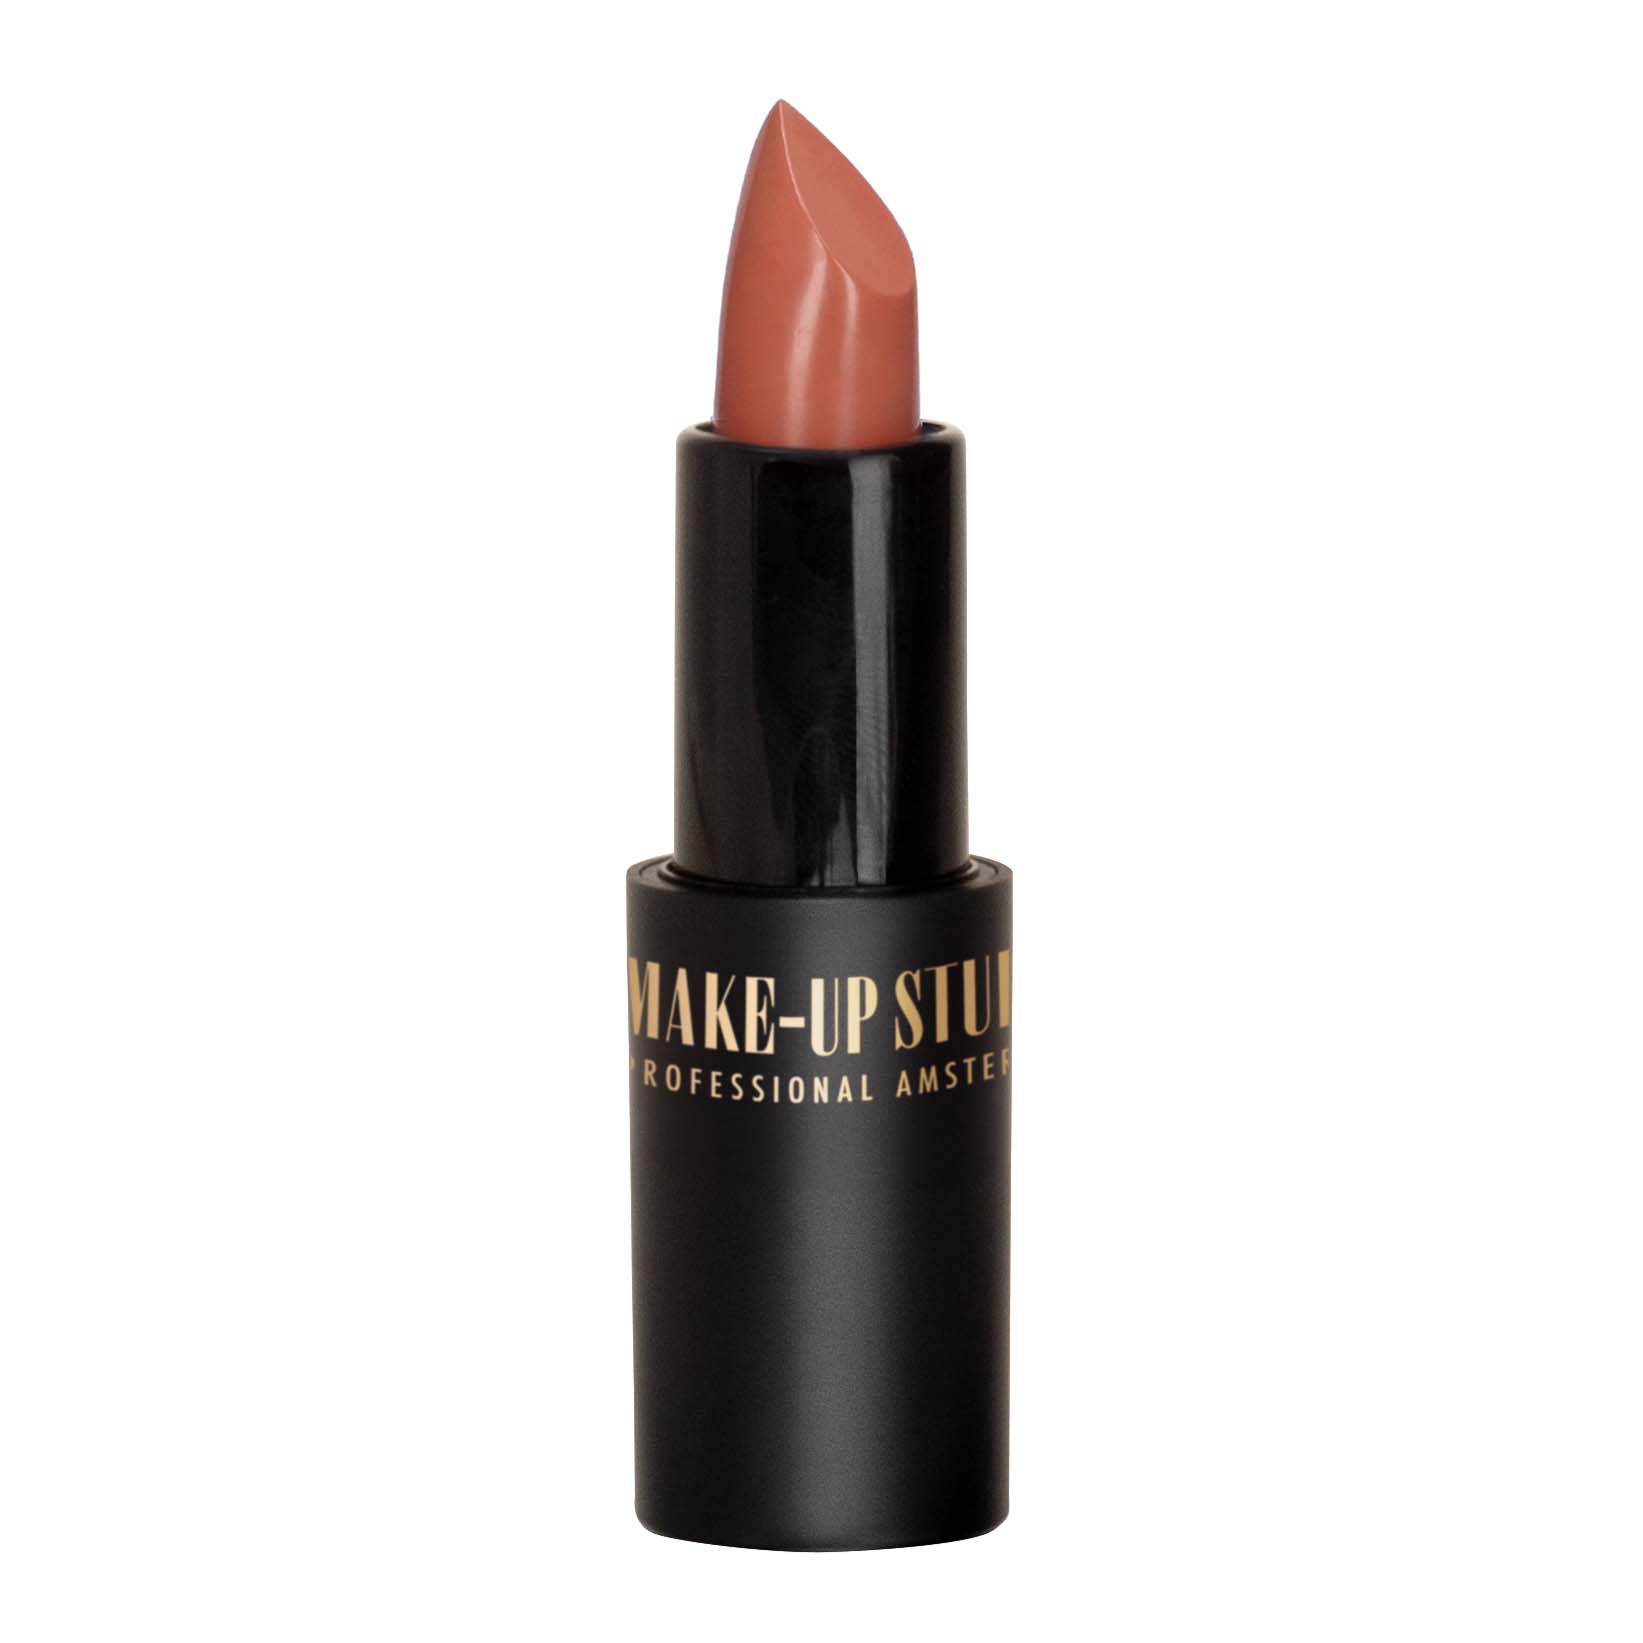 Shop all lip products from Make-up Studio online! | Make-up Studio Amsterdam | Lipgloss